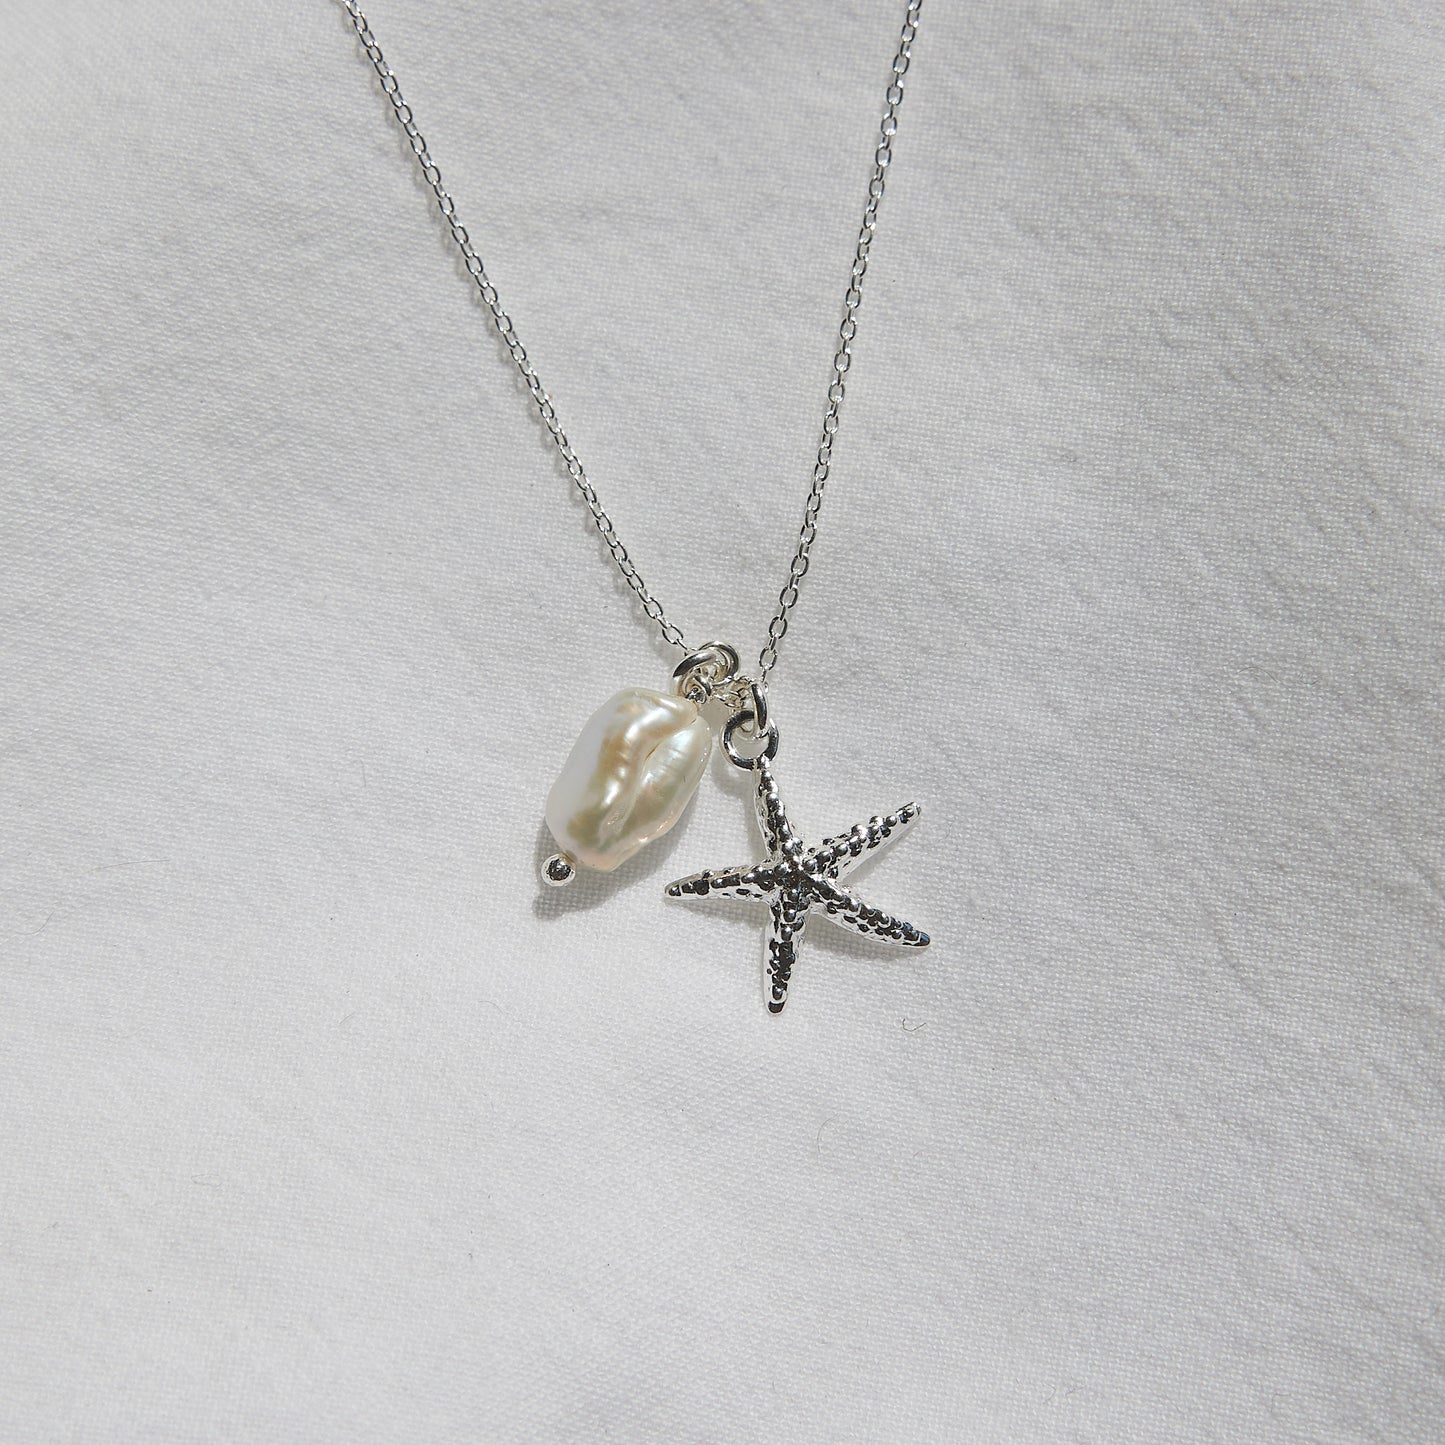 Starfish and keshi pearl necklace sterling silver